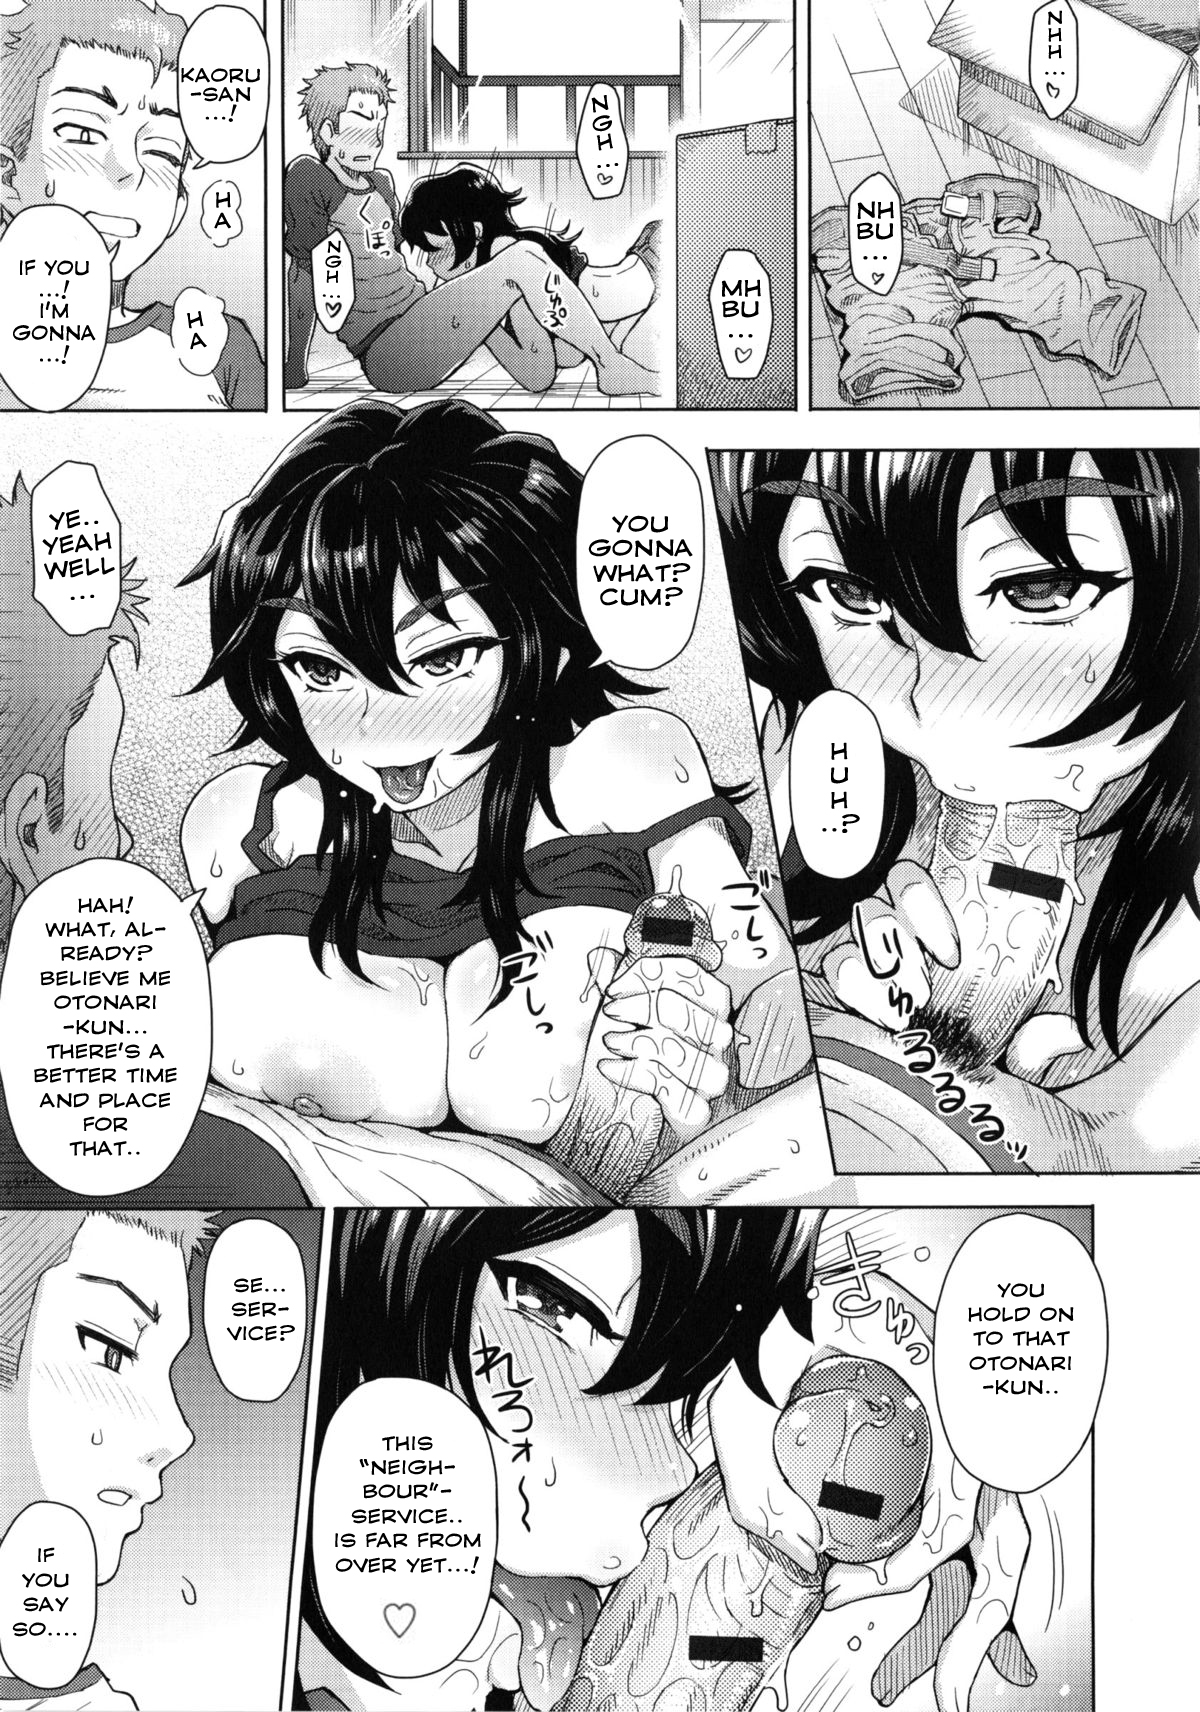 [Itou Eight] The Situation with the Young Girl Next Door Moving in [English] page 5 full